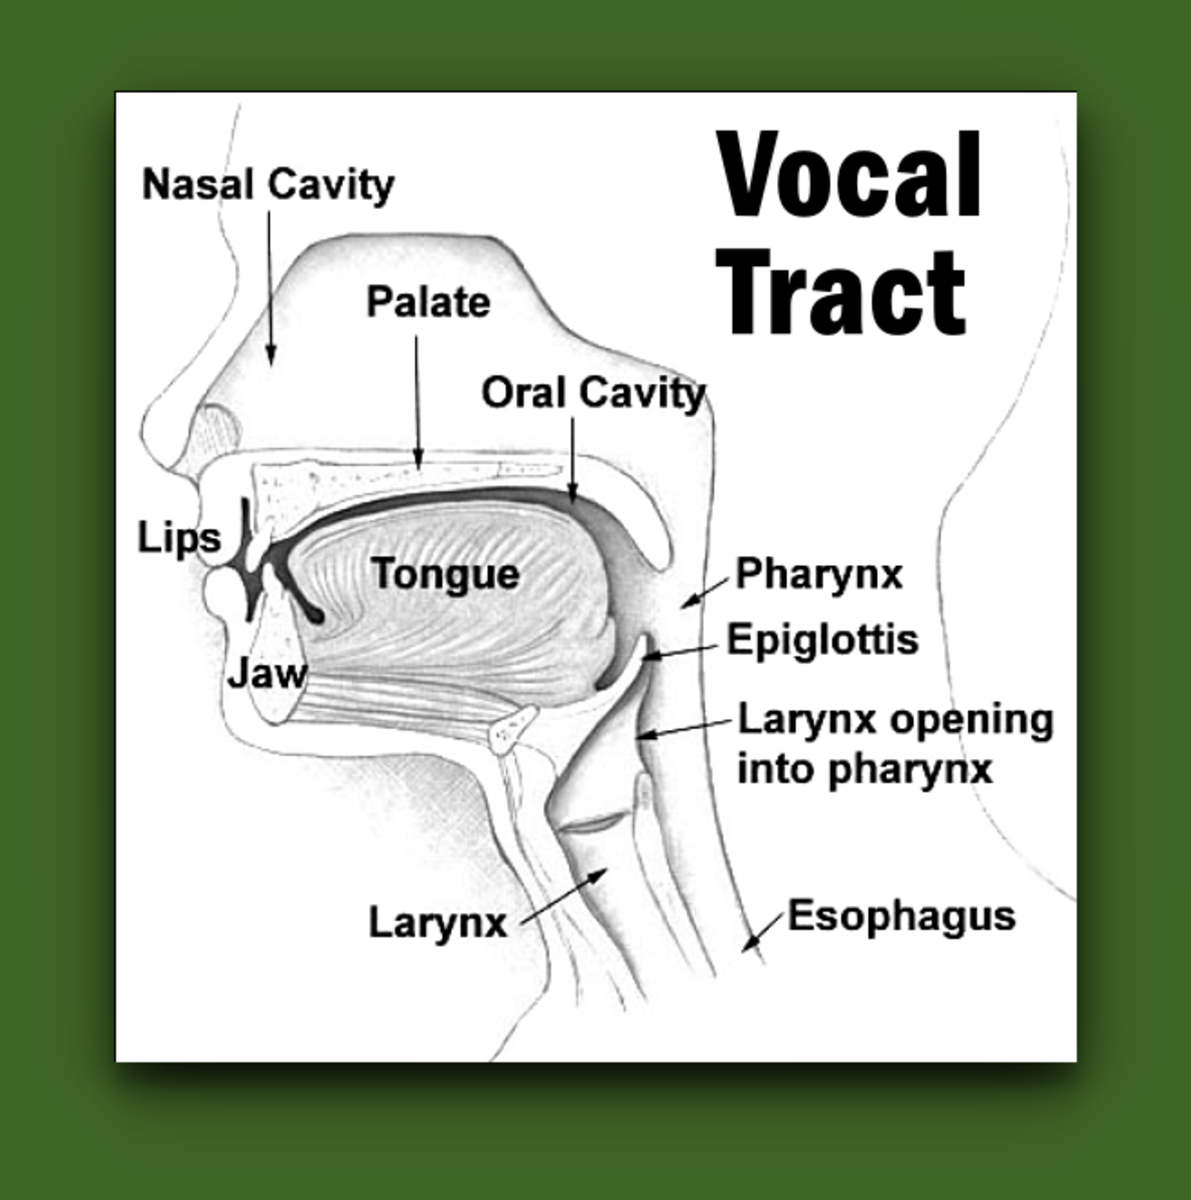 Diagram of the Vocal Tract